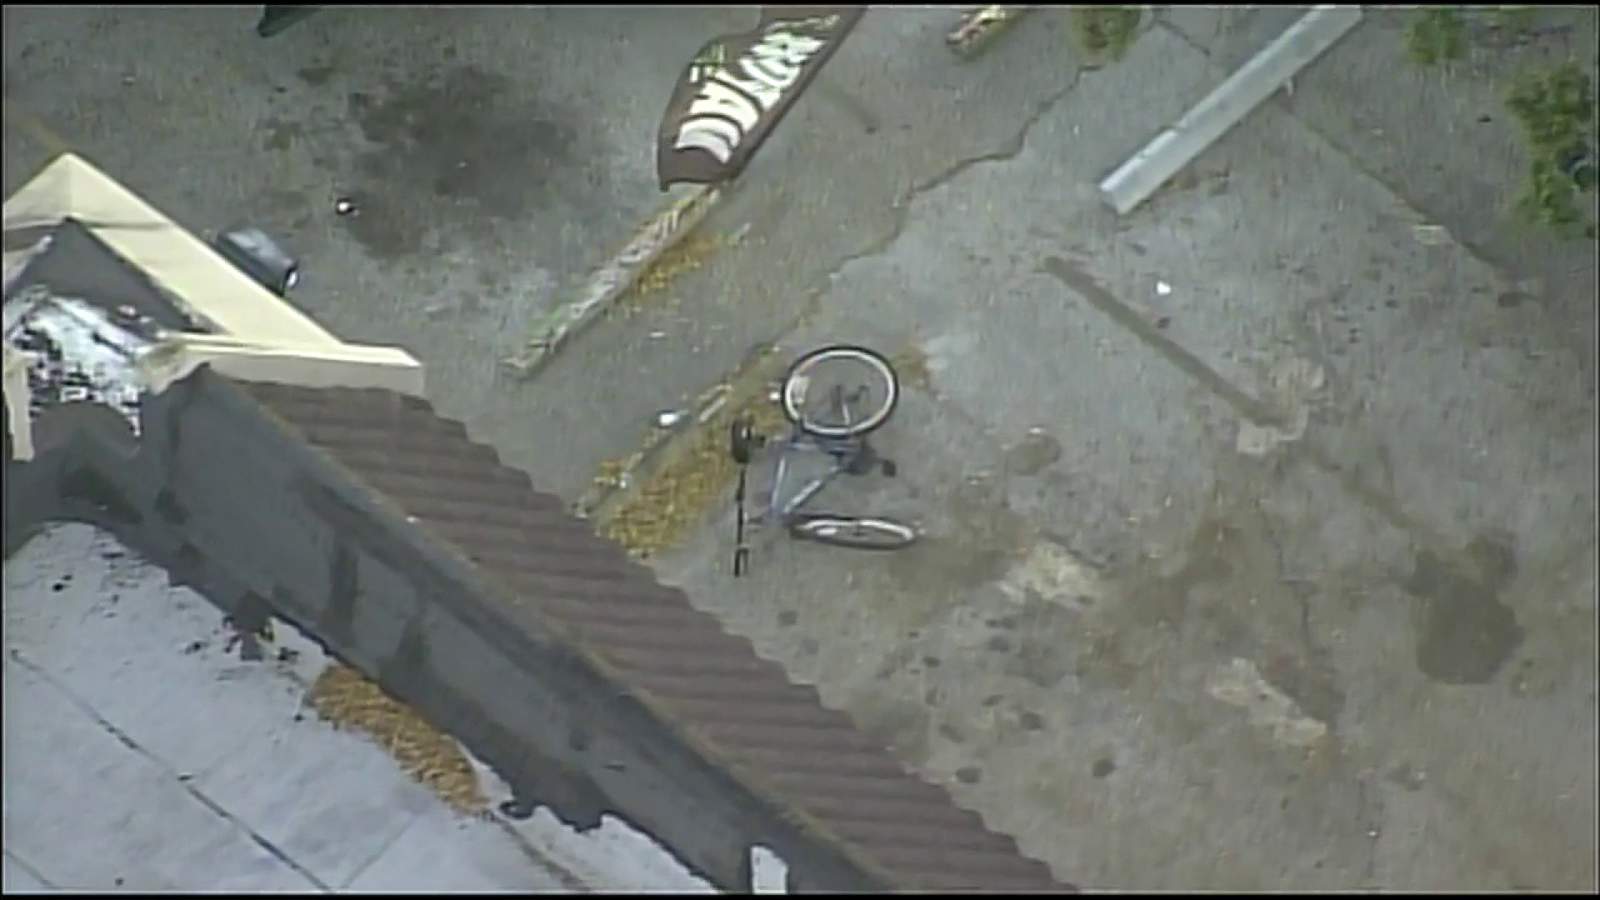 Police on scene of bicyclist possibly hit by car in Northwest Miami-Dade